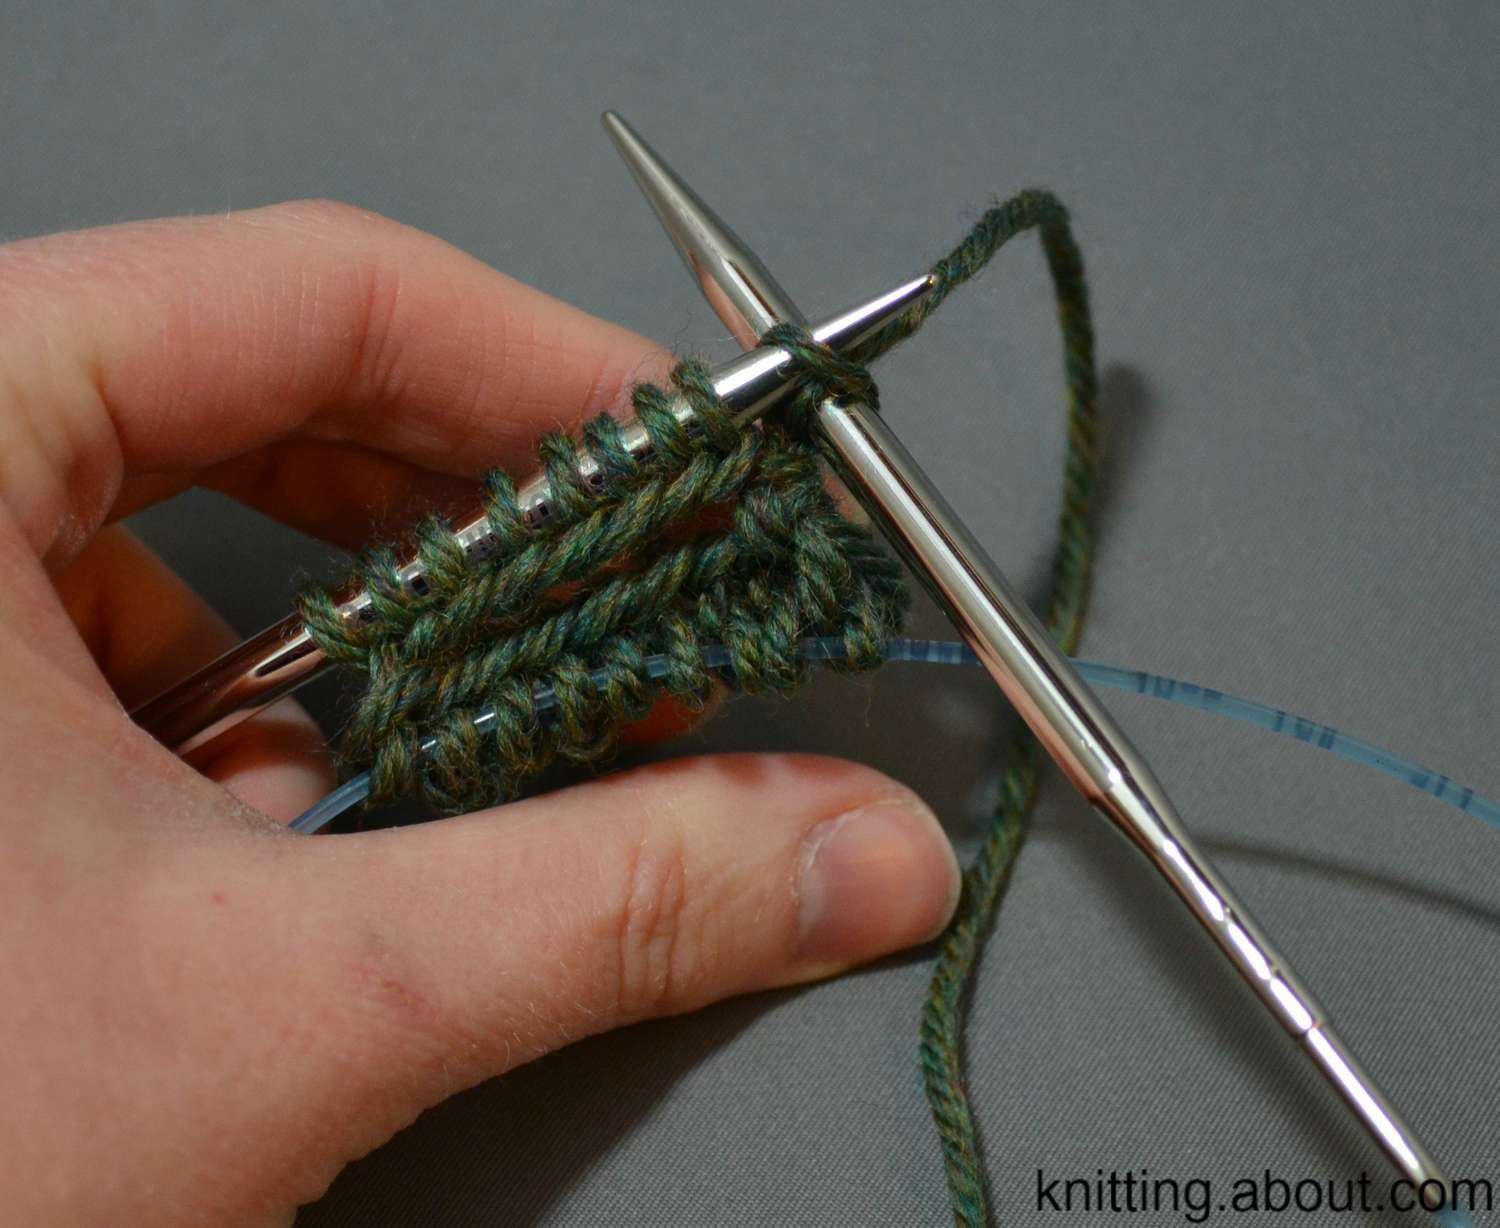 Working on the second needle when knitting in the round on two circulars.